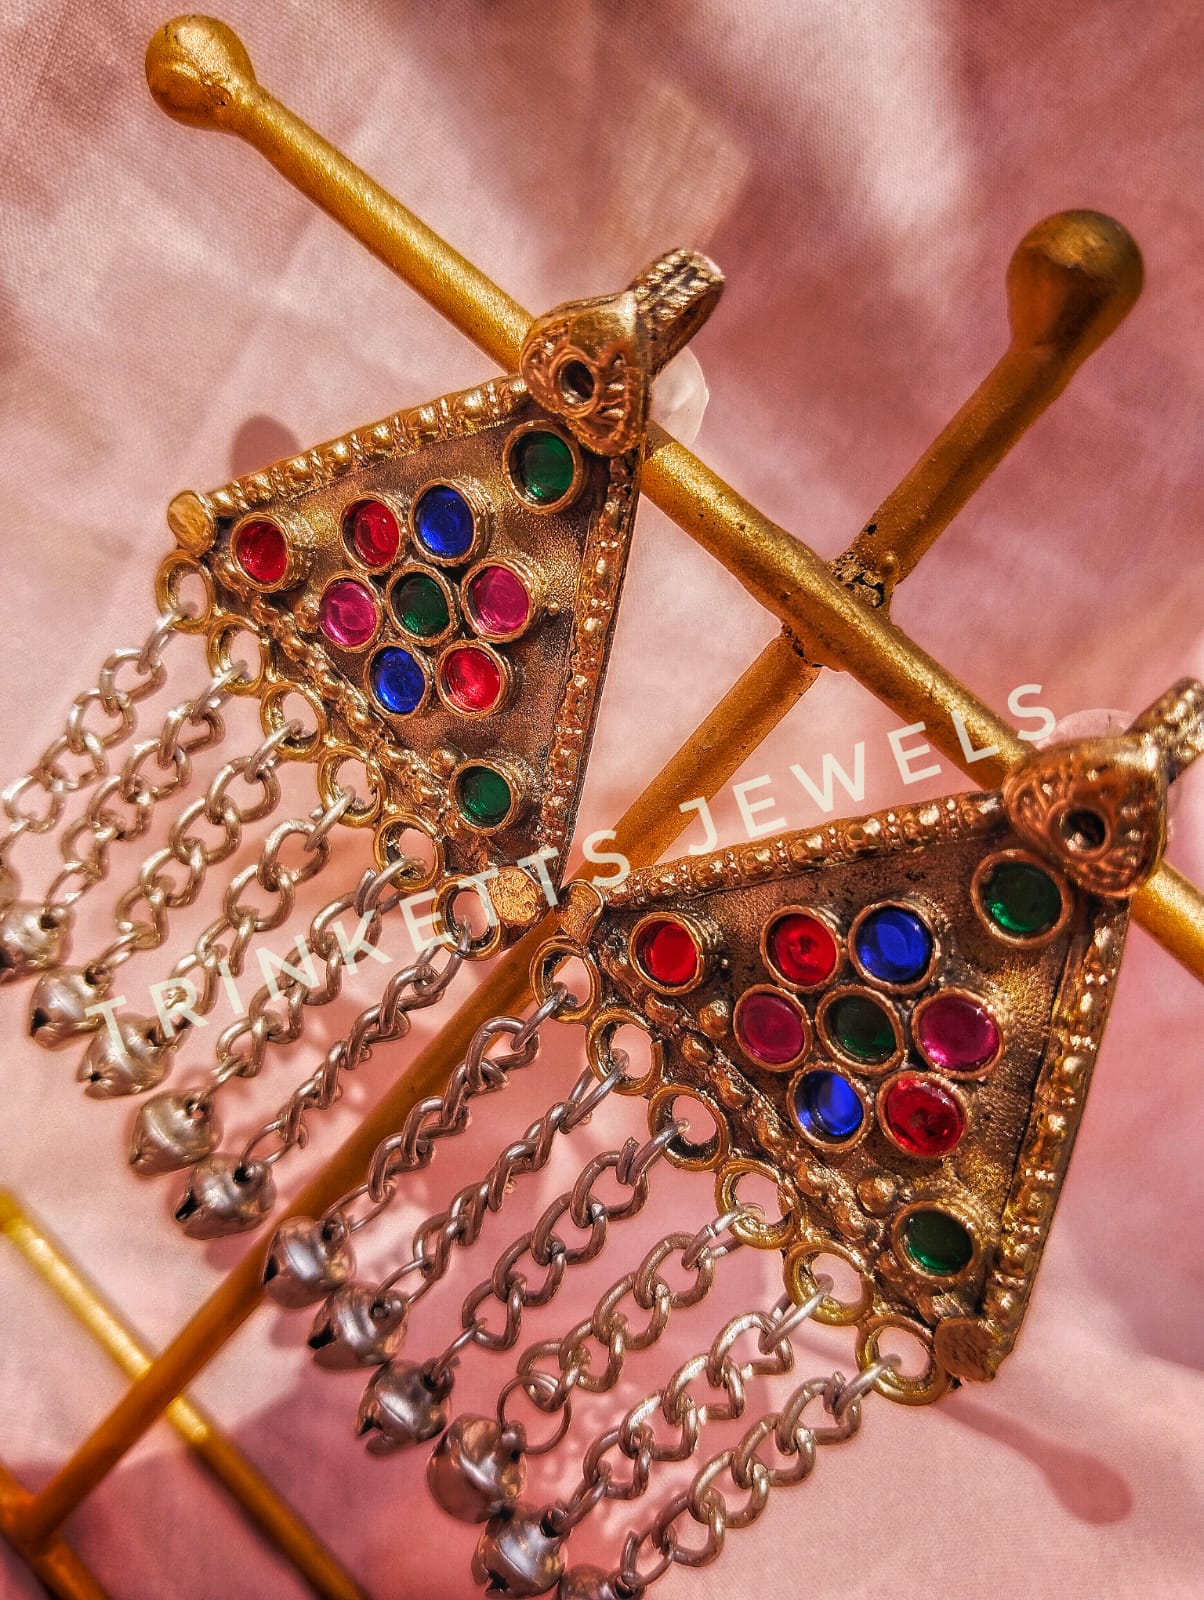 Trinketts' Afghani Style Earrings in a captivating triangular design. Heavy metal craftsmanship with colorful stones arranged in a floral pattern, accompanied by ghungroo-adorned chain hangings. The perfect fusion of tradition and trend, now available in a vibrant multi-color palette.